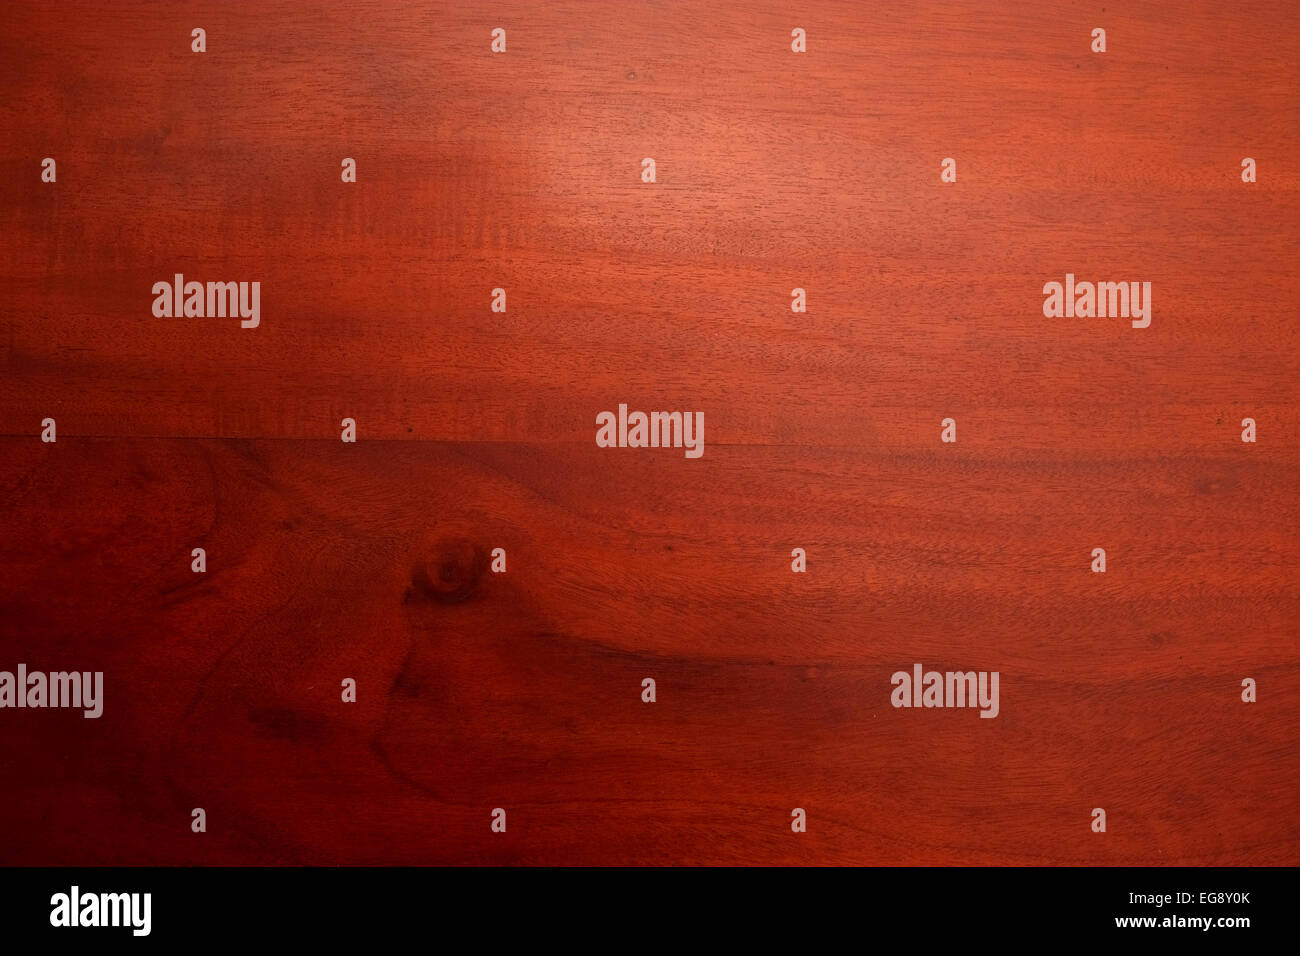 Mahogany wooden surface. Backgrounds and textures Stock Photo